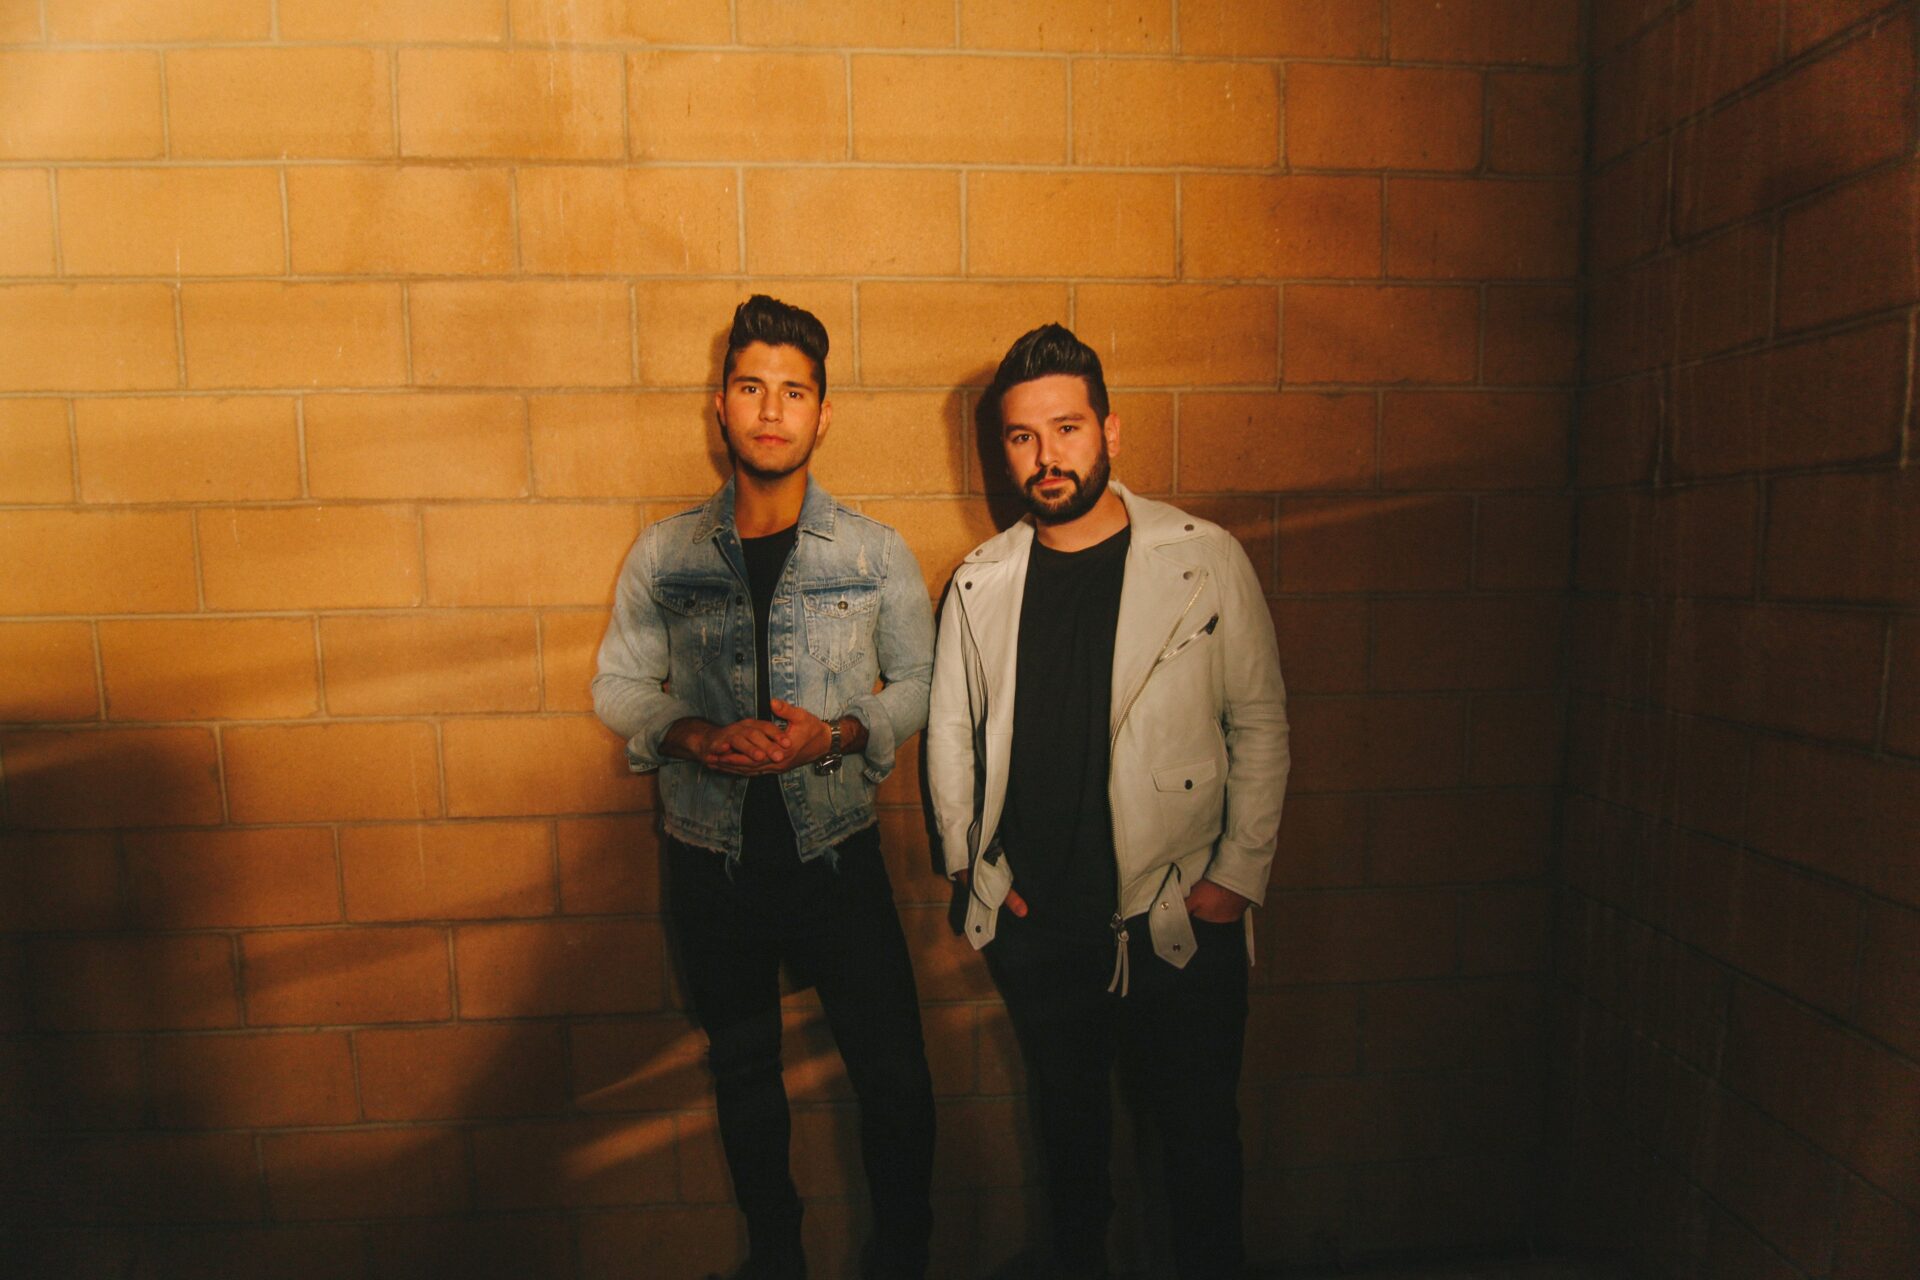 INTERVIEW: Dan Smyers discusses Dan + Shay’s new album, Kelly Clarkson, and more